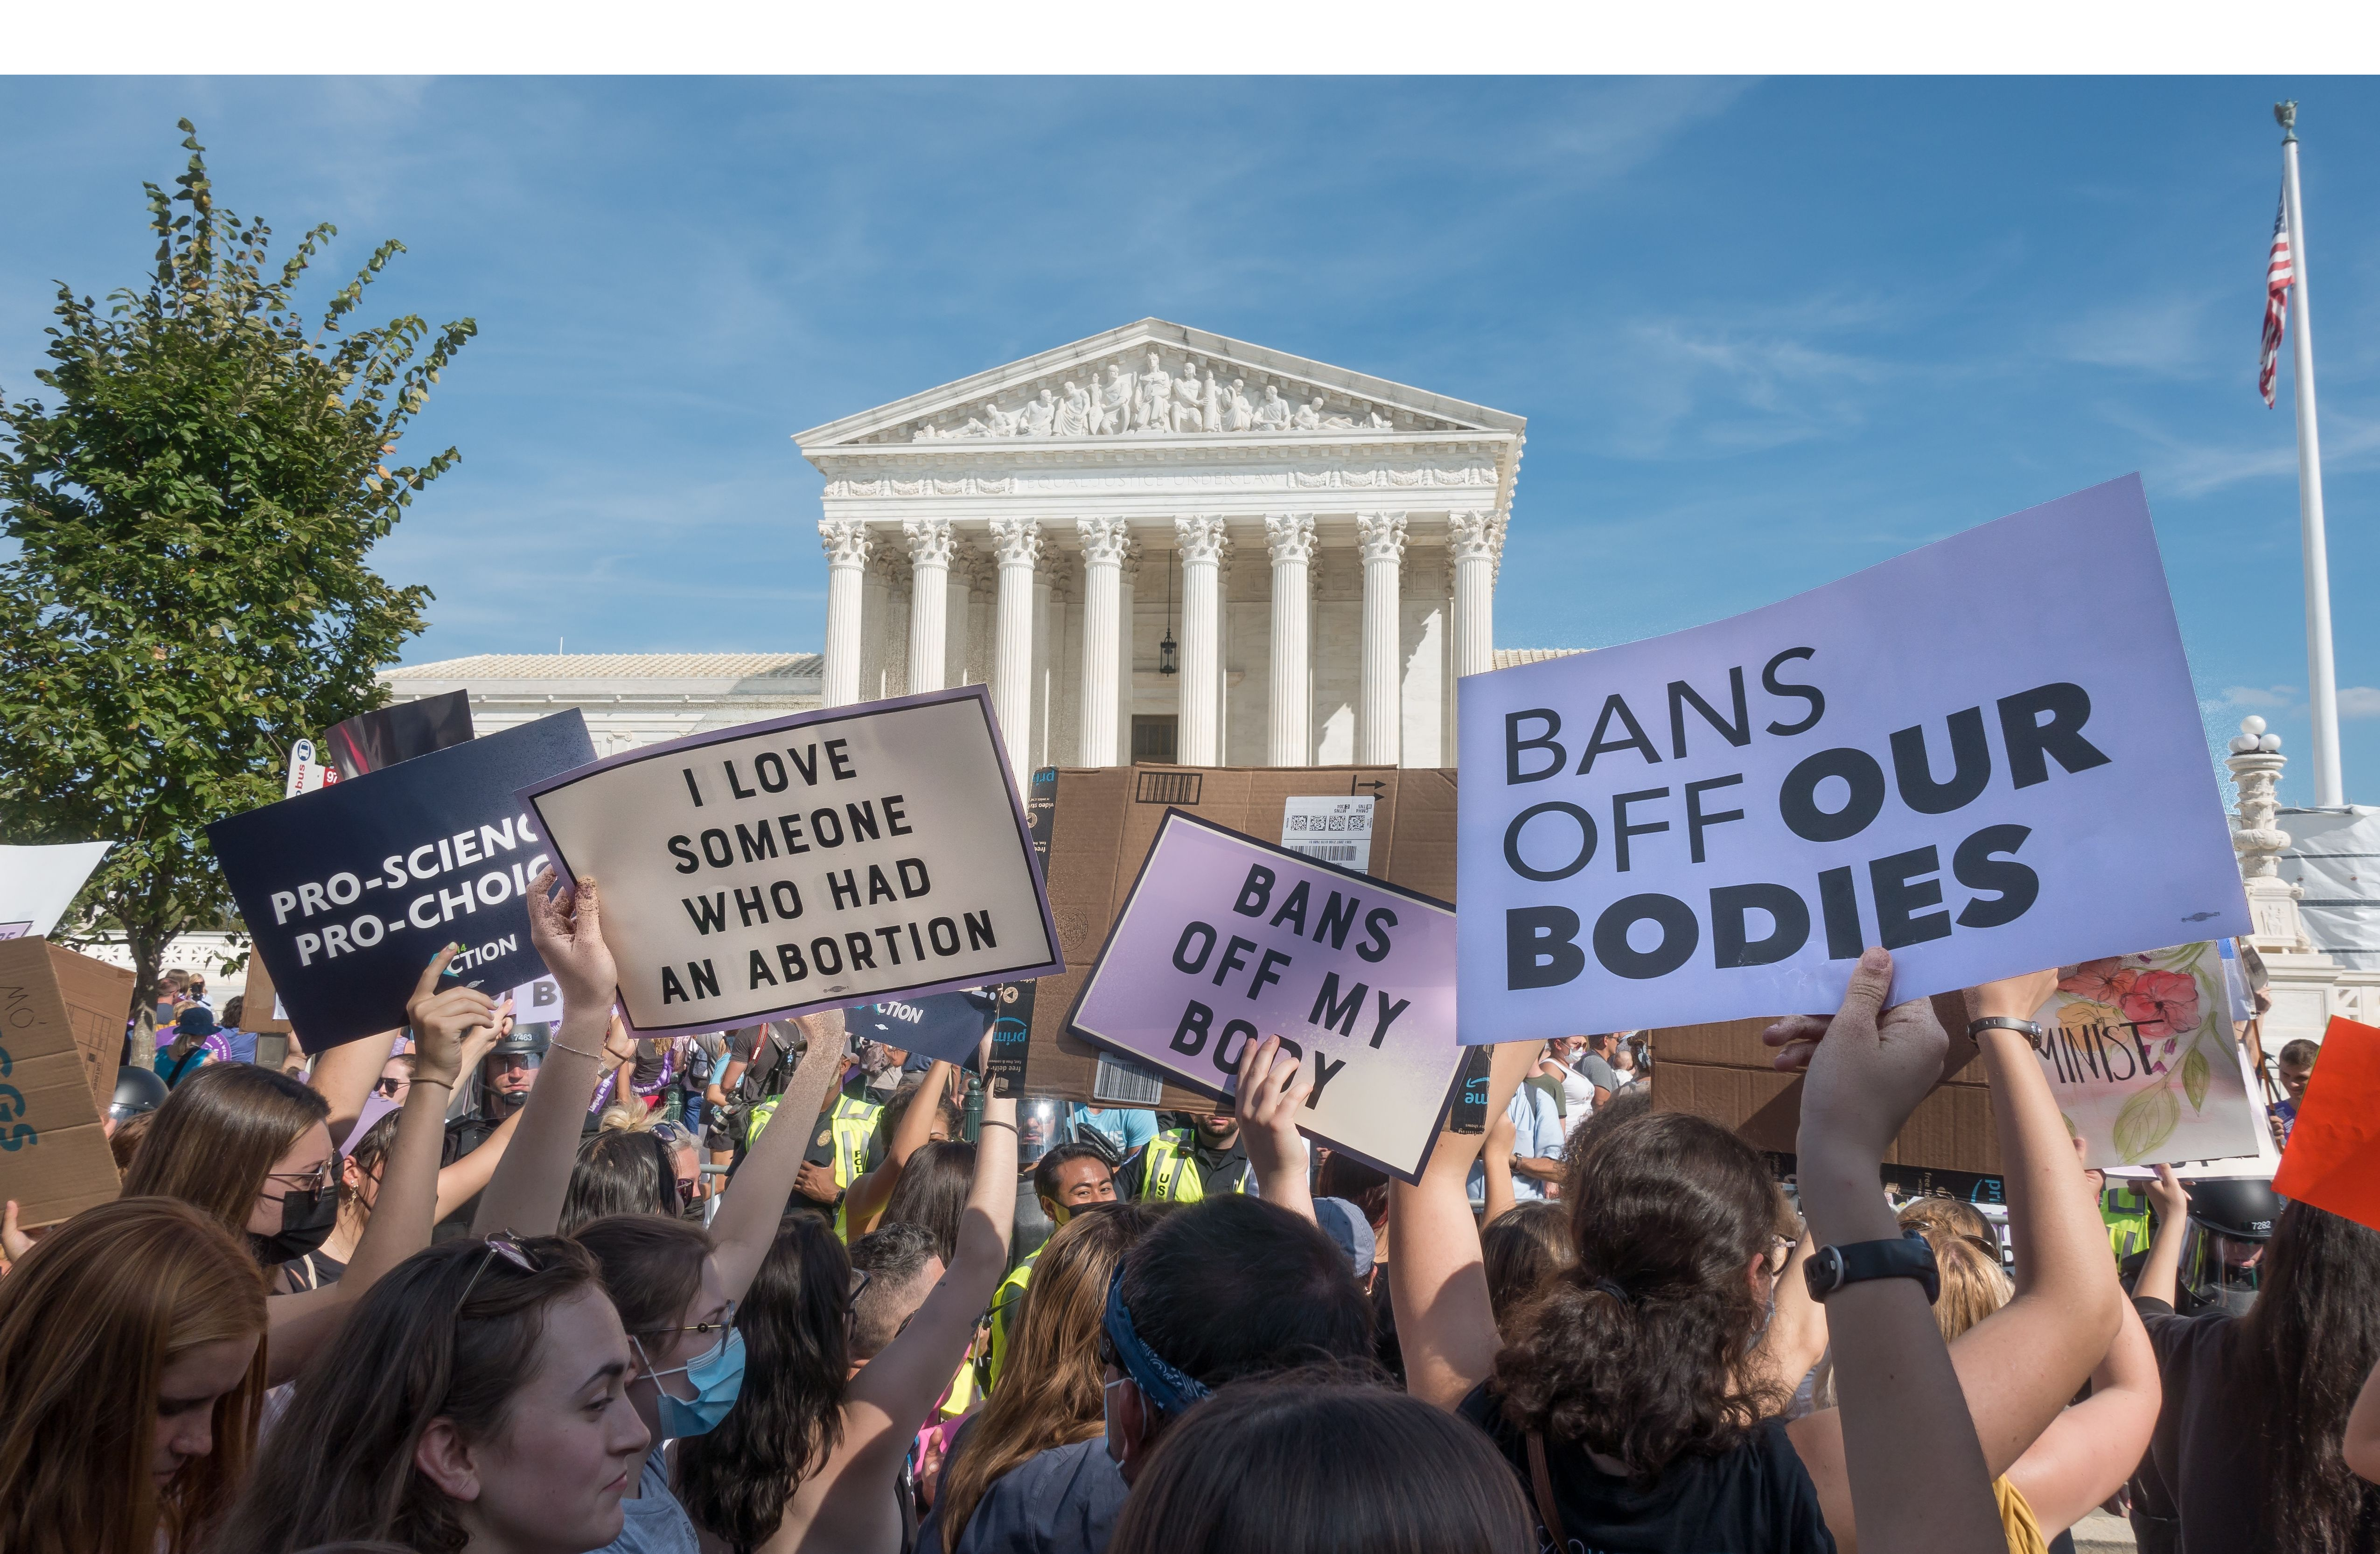 With the Supreme Court behind them, protestors hold signs reading "Bans off our bodies" and "I love someone who had an abortion"